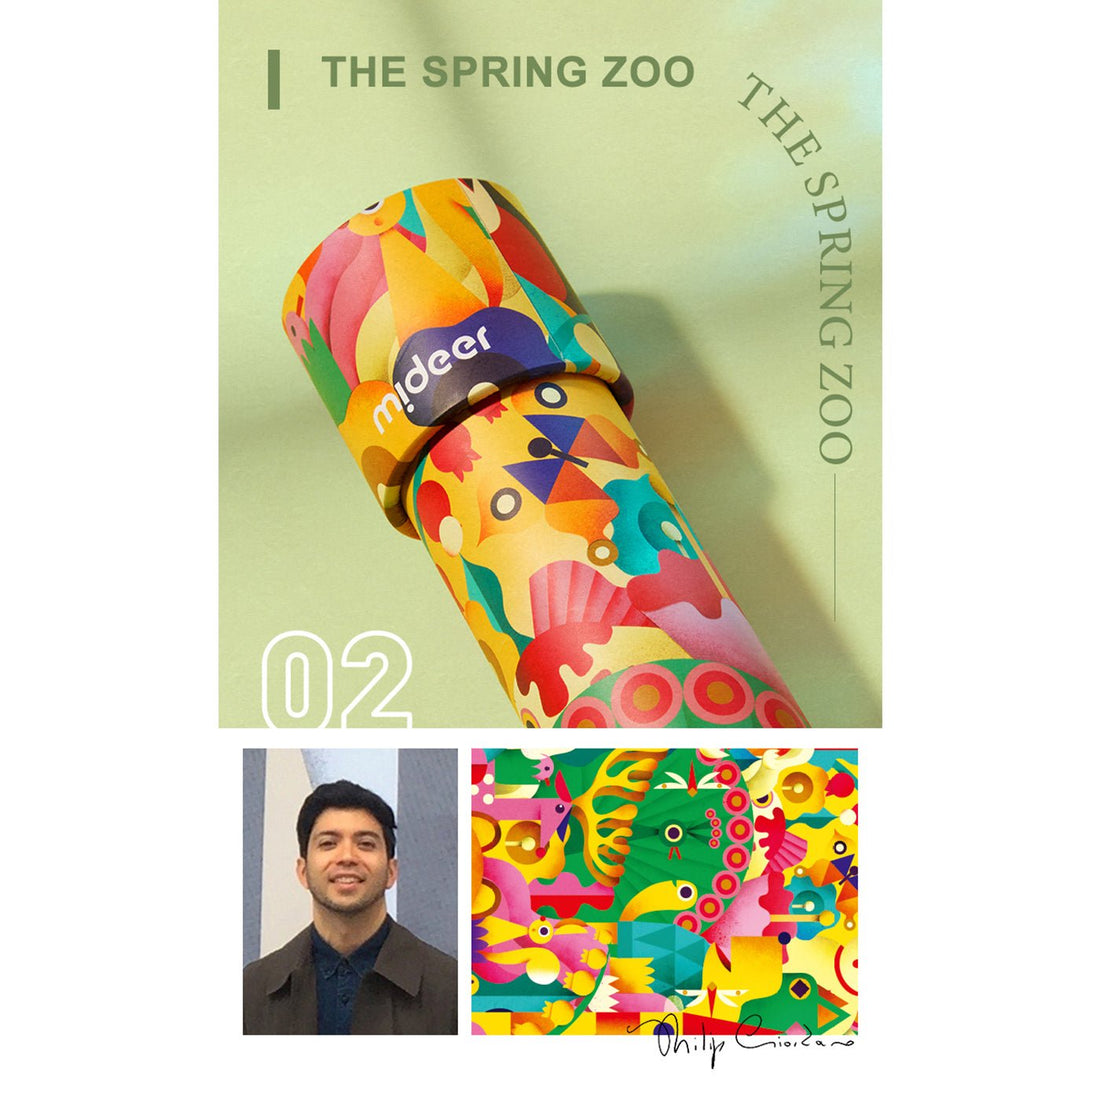 Colorful Kaleidoscope - A Day In The Spring Zoo - 0cm